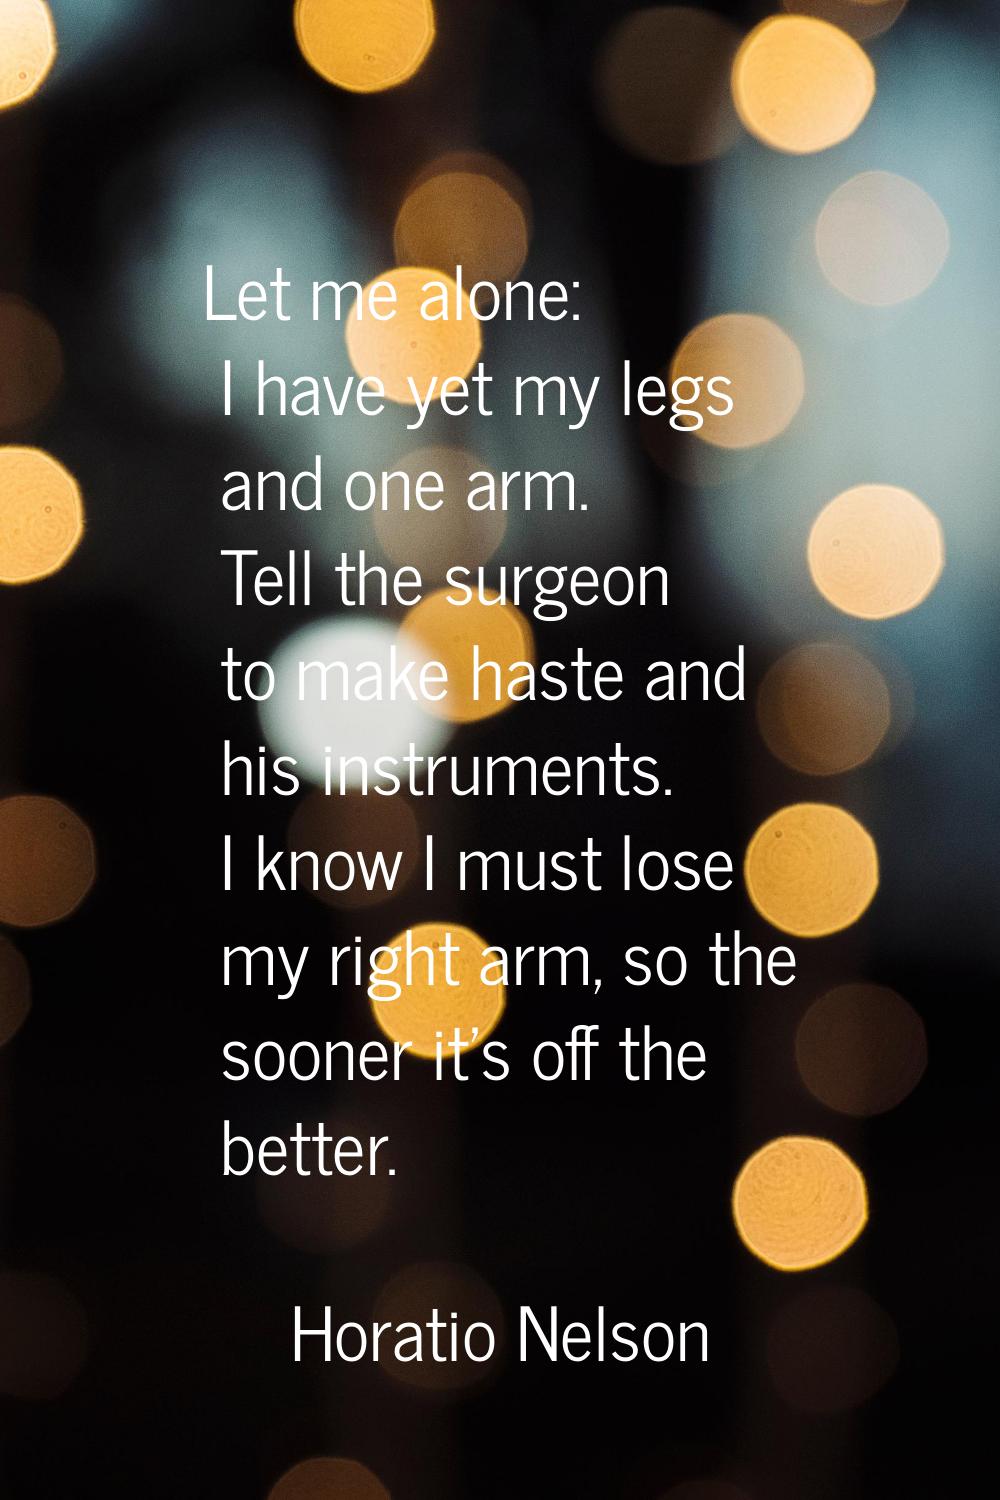 Let me alone: I have yet my legs and one arm. Tell the surgeon to make haste and his instruments. I